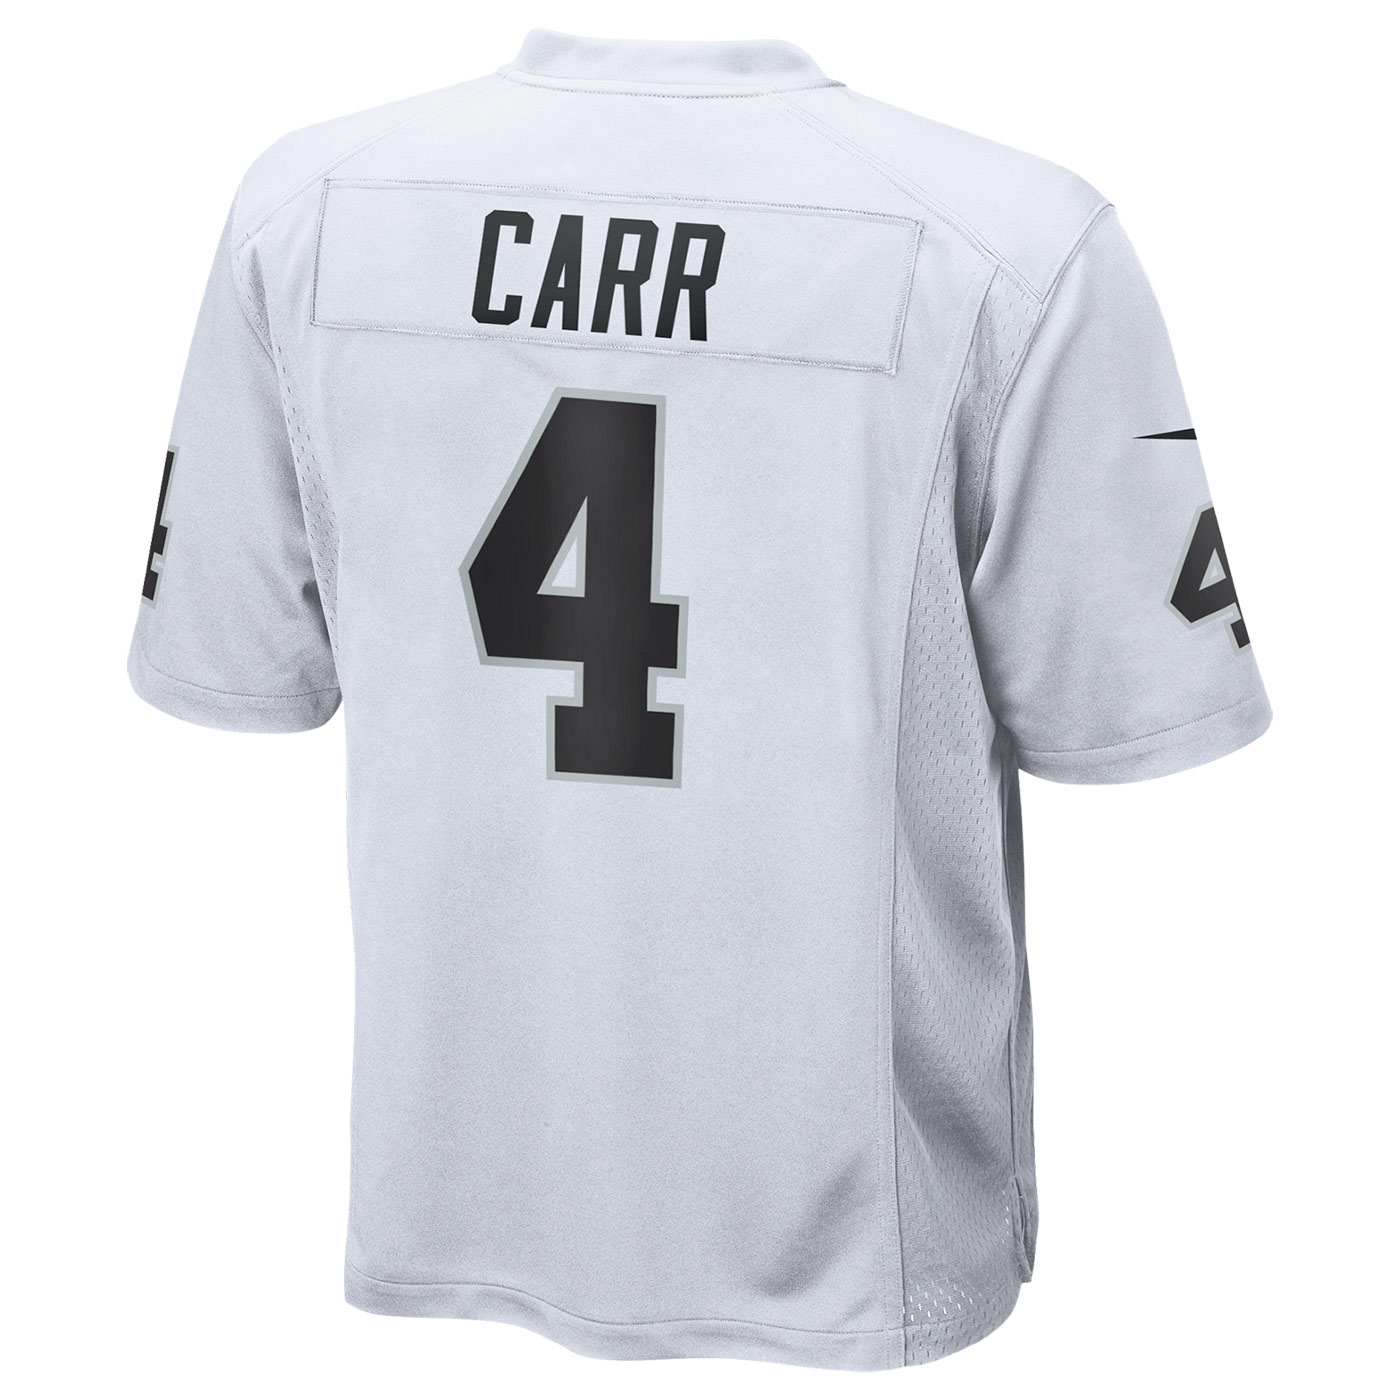 Product Detail | NIKE DEREK CARR YOUTH GAME JERSEY - White - S